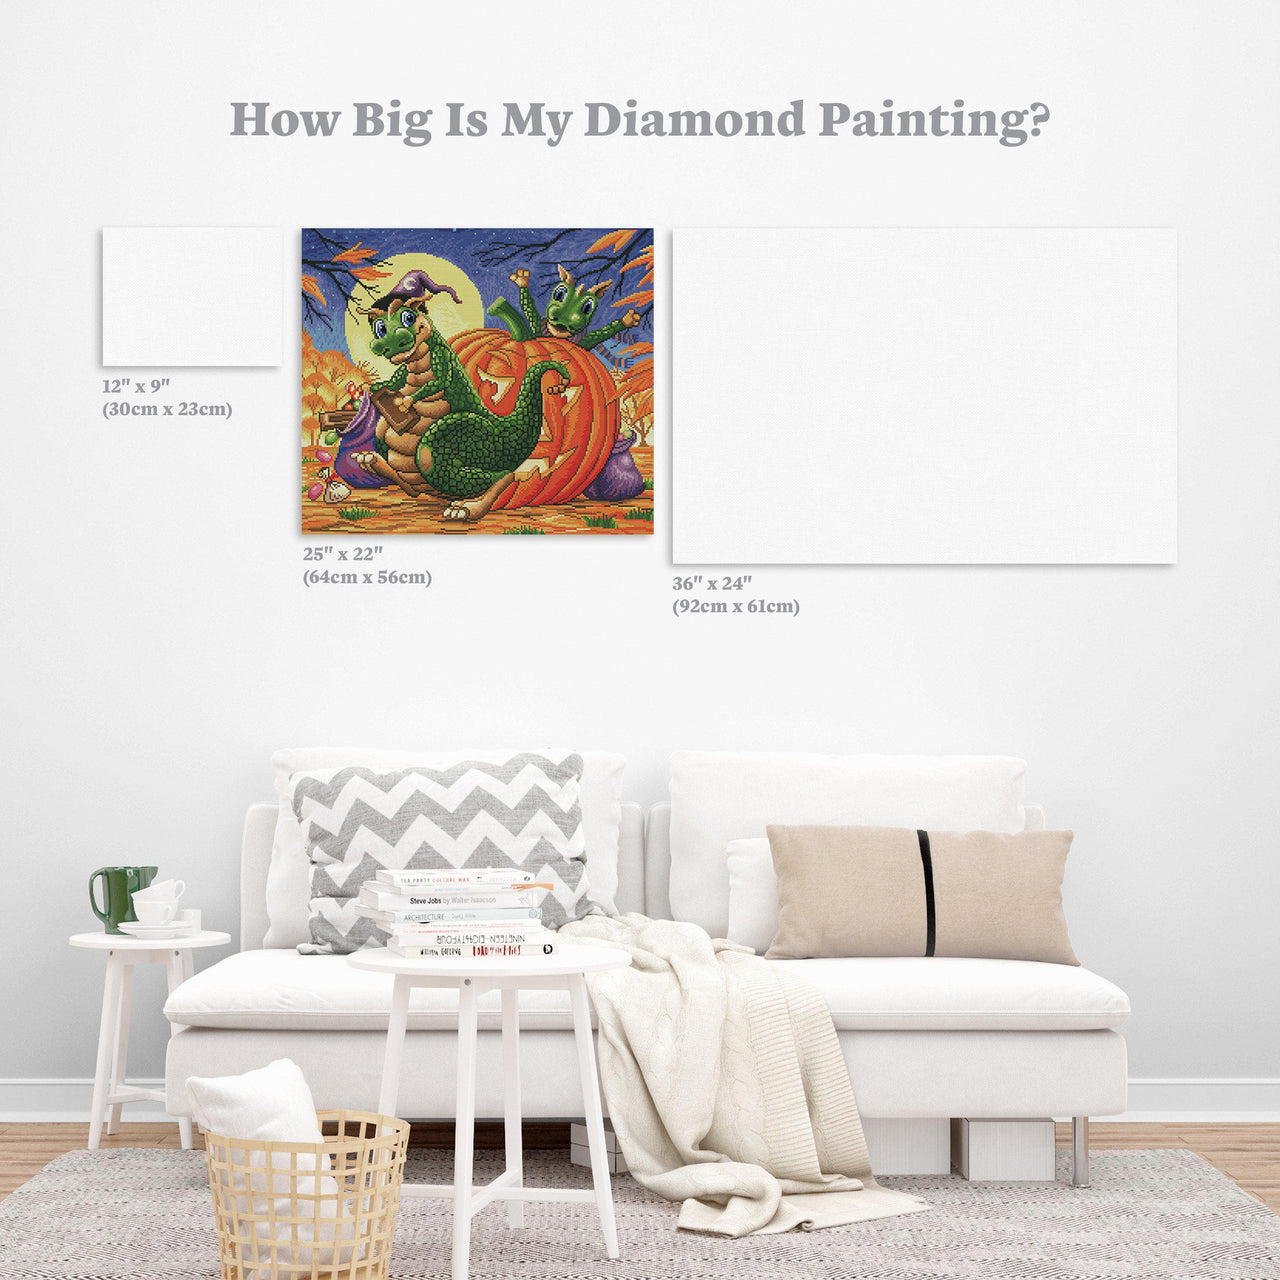 Diamond Painting Boo 25" x 22″ (64cm x 56cm) / Round with 43 Colors including 3 ABs / 45,372